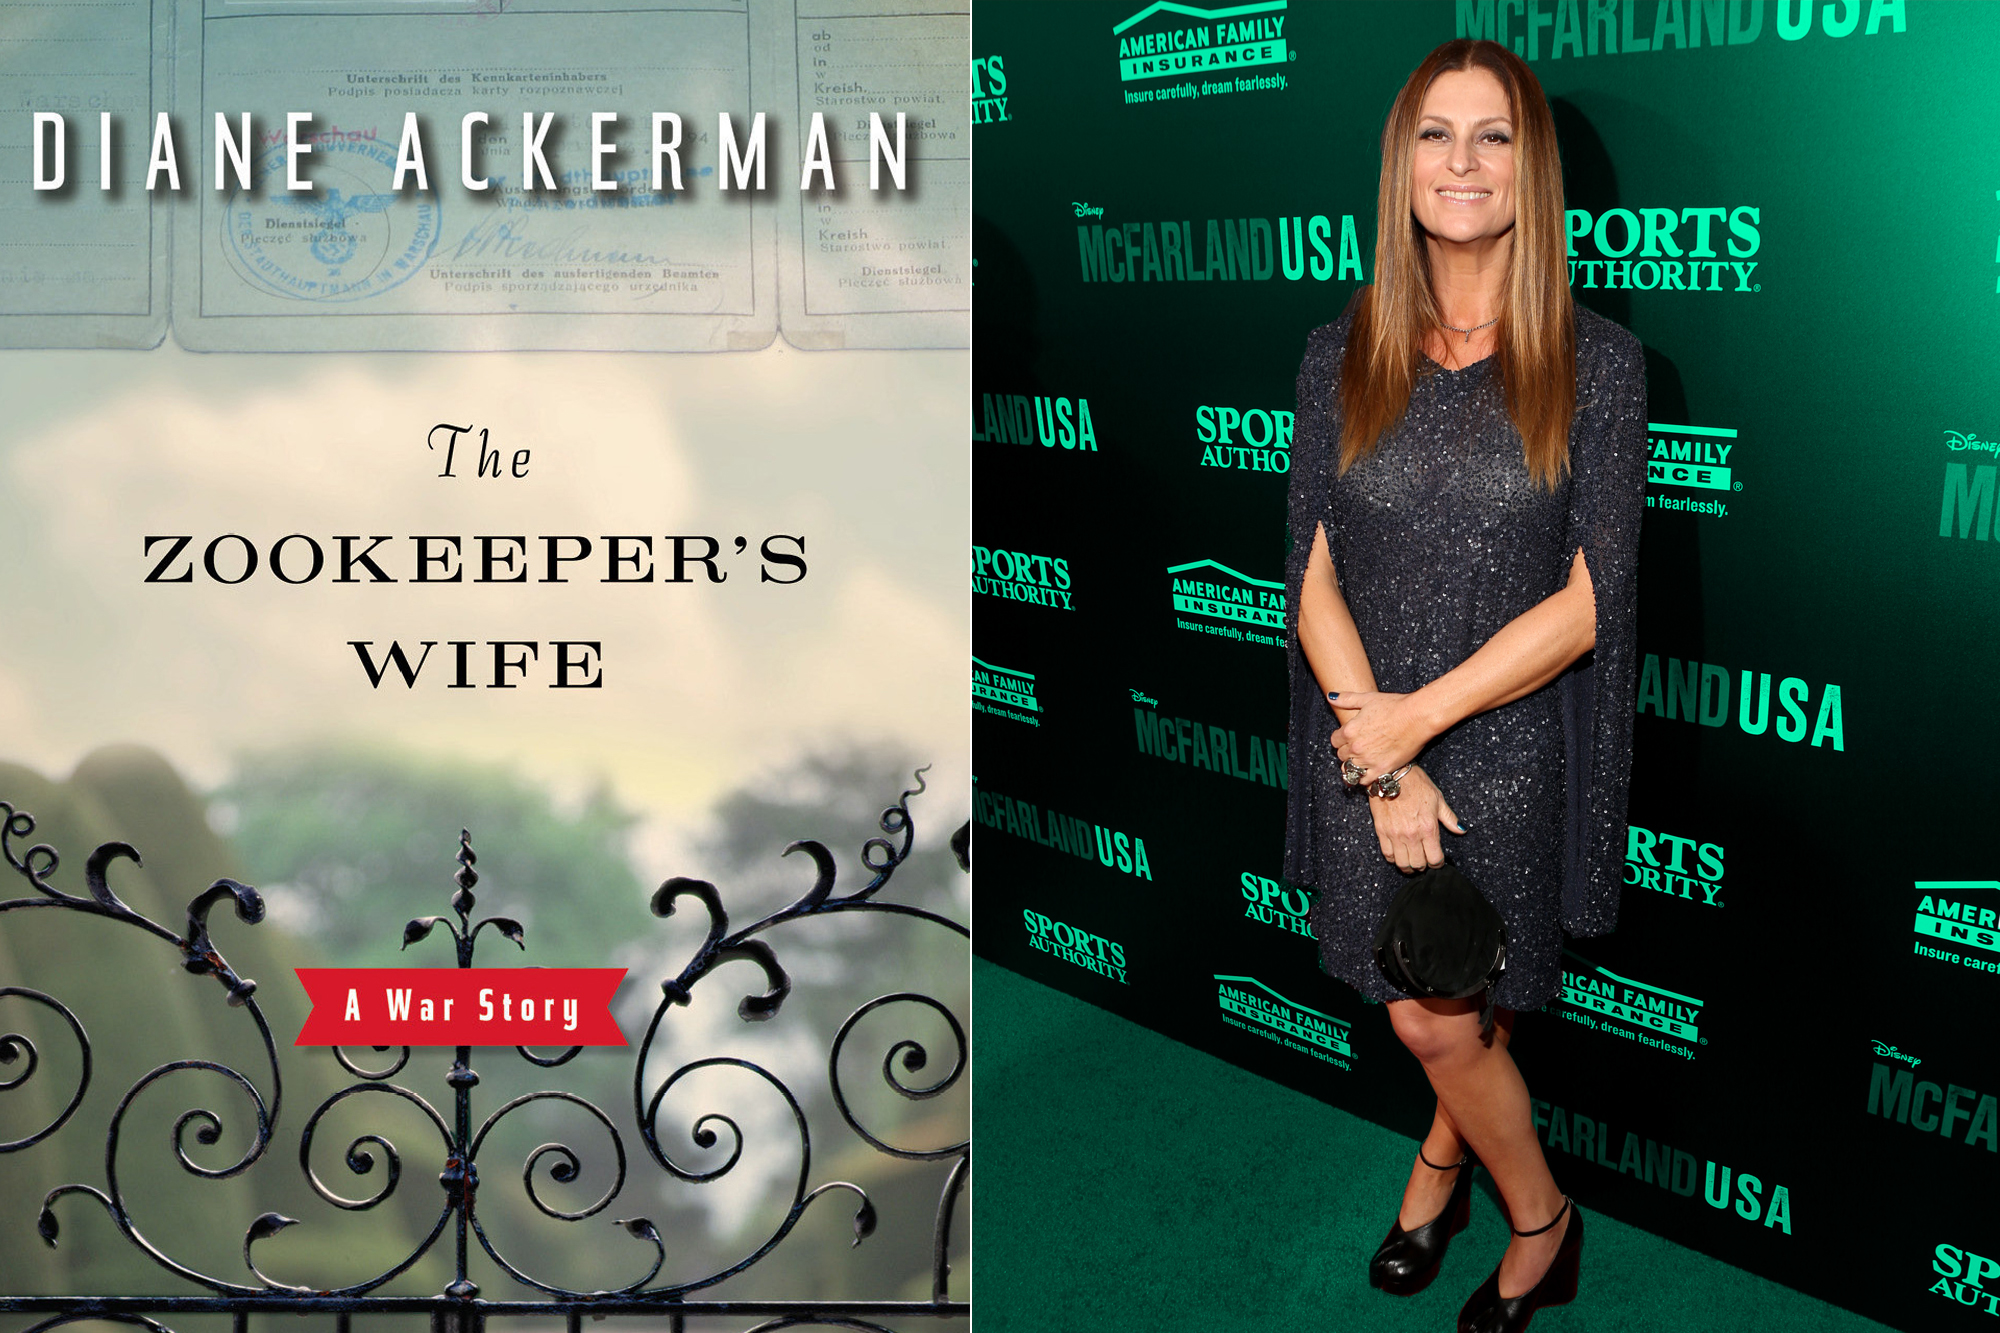 The Zookeeper’s Wife, directed by Niki Caro, pictured, written by Angela Workman.